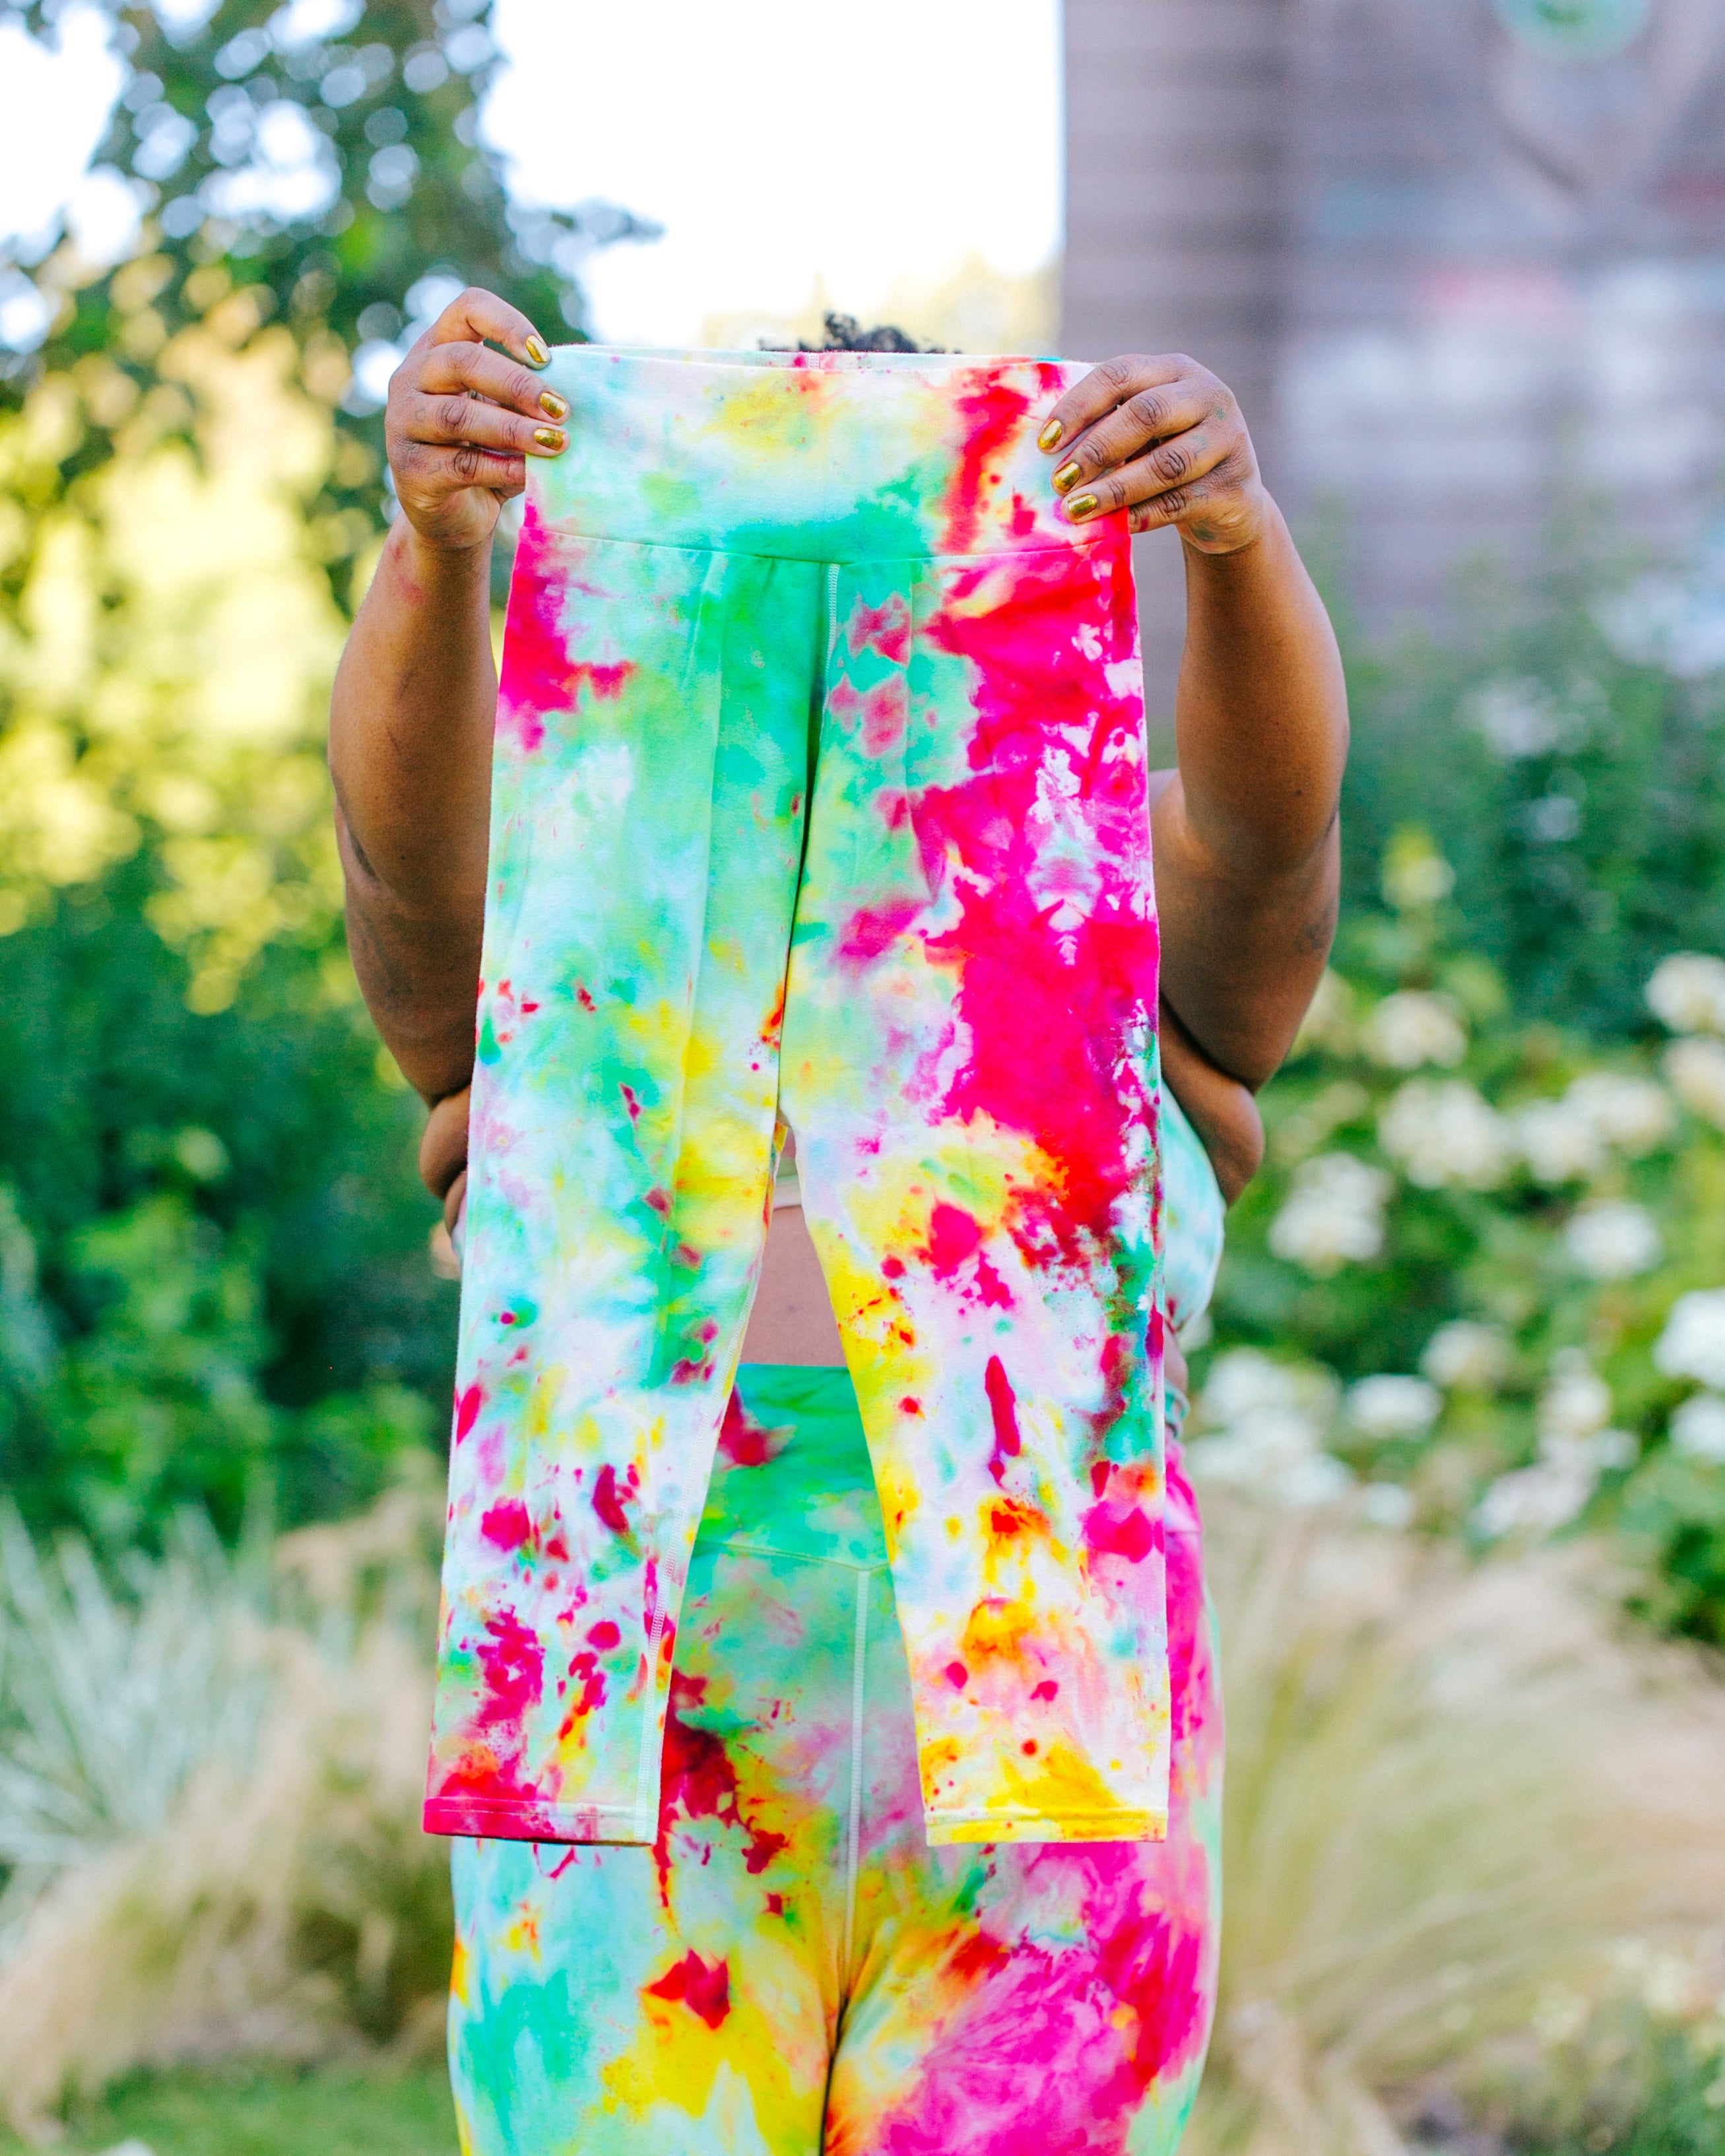 Model wearing Ice Dyed Bike Shorts holding up Ice Dyed 3/4 Length Leggings in a mix of green, pink, and yellow colors.